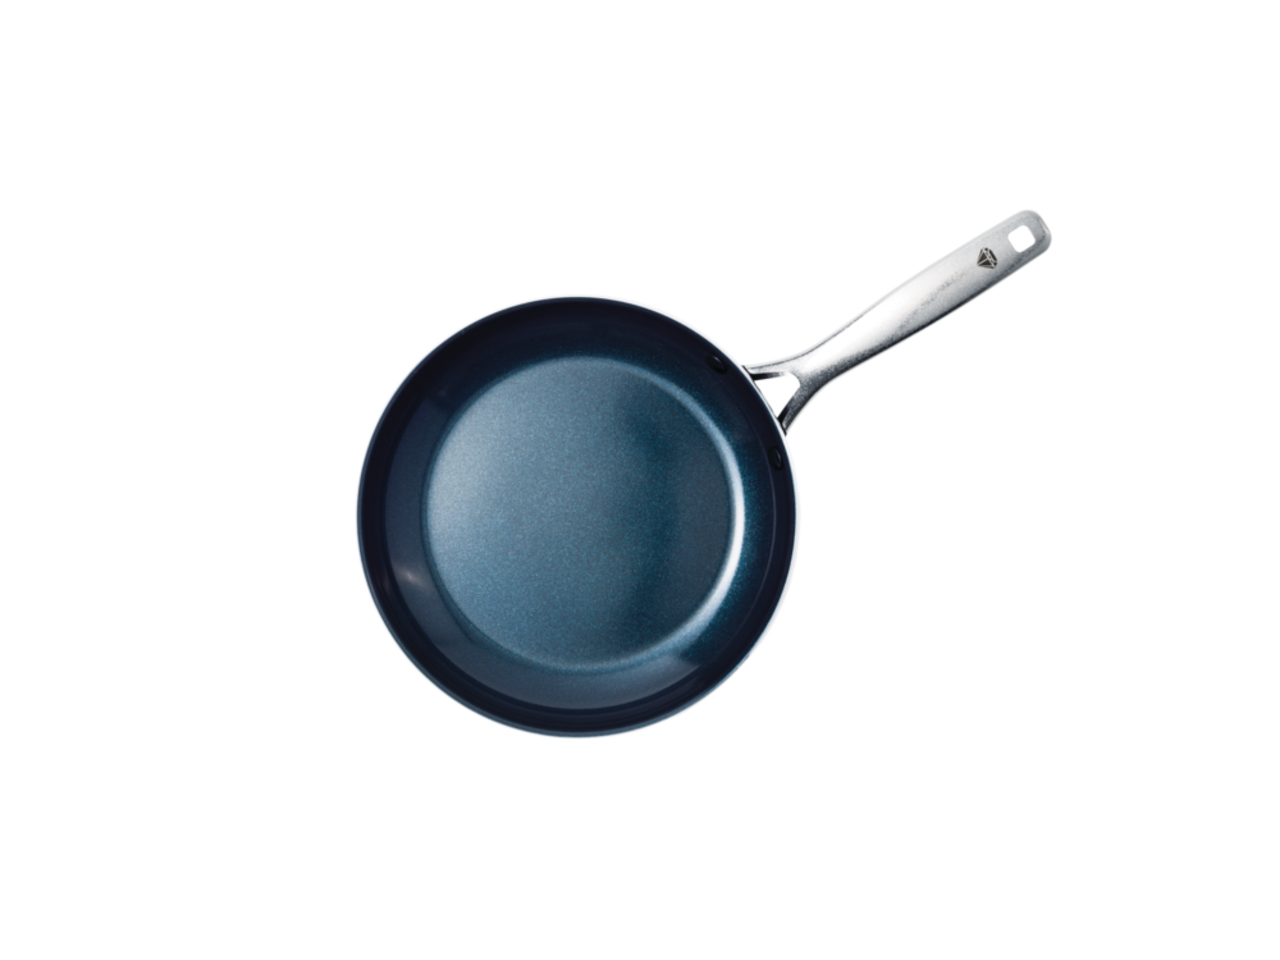 https://media-www.canadiantire.ca/product/living/as-seen-on-tv/asotv/3993325/asotv-blue-diamond-12-fry-pan-eea786c7-8127-4207-b4fa-f10f5a898004.png?imdensity=1&imwidth=1244&impolicy=mZoom